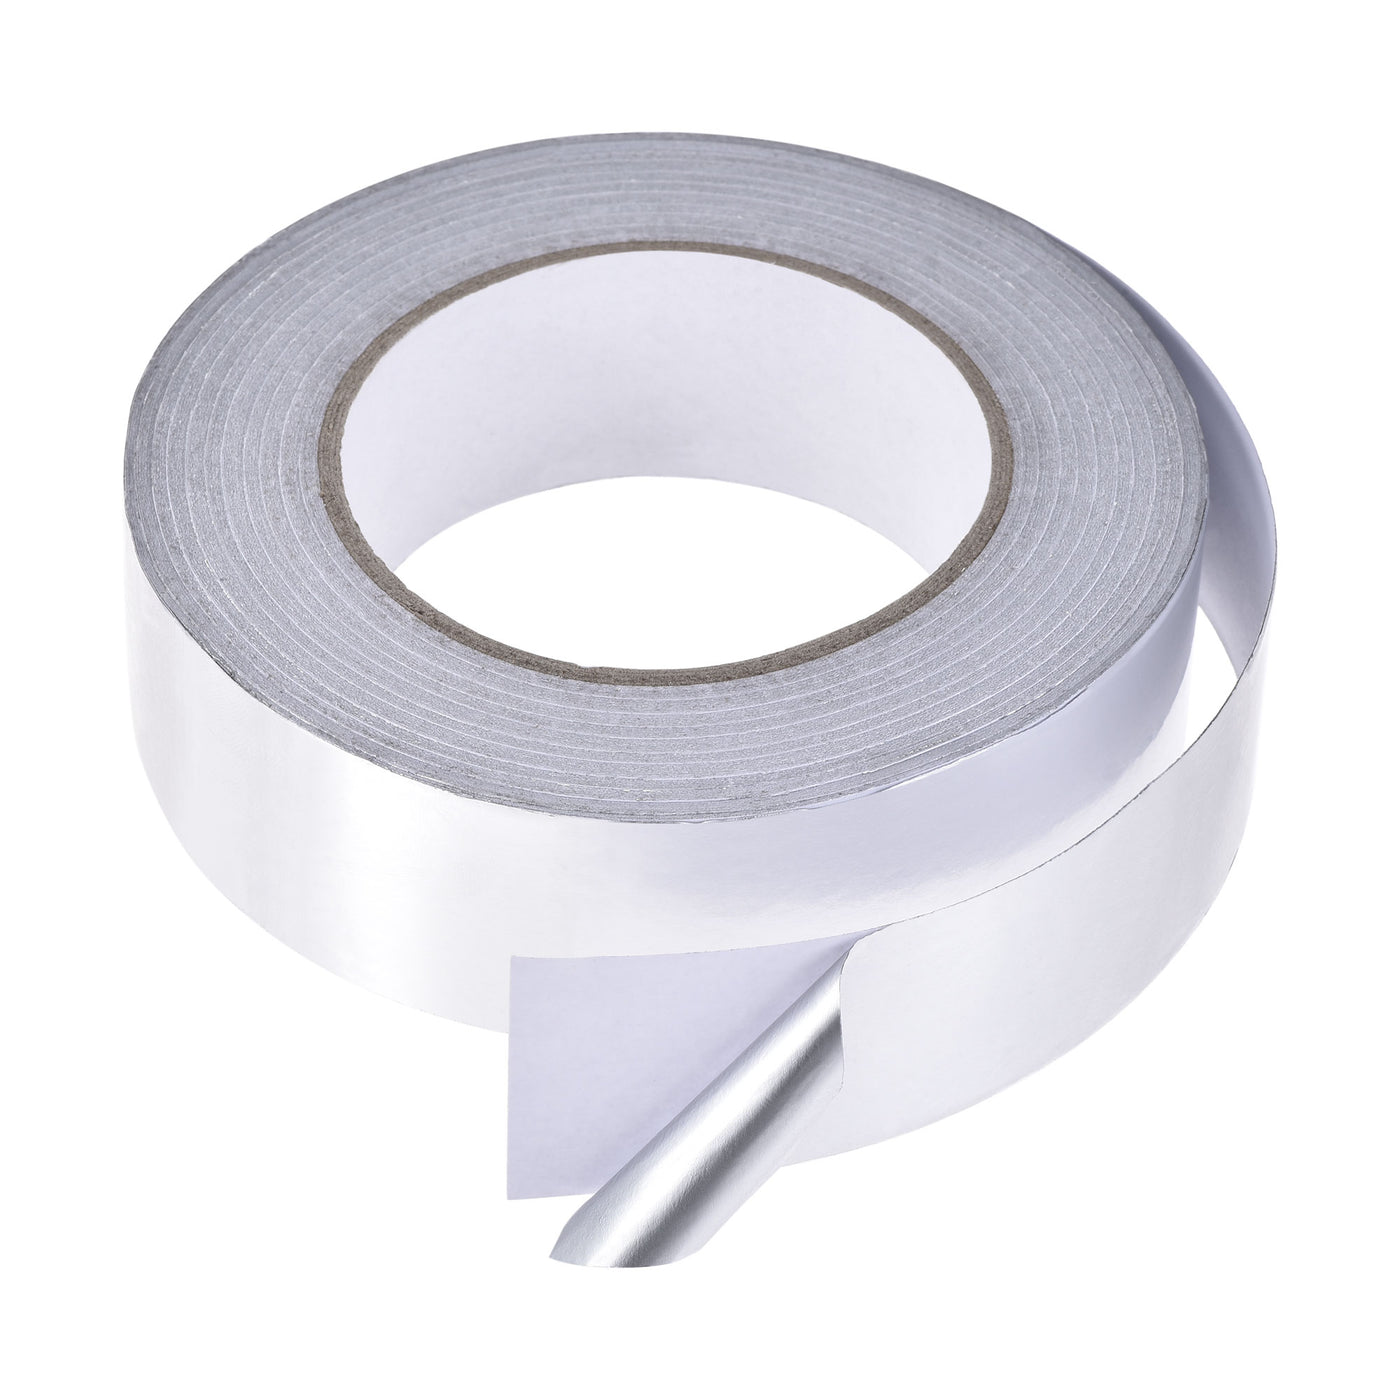 uxcell Uxcell Aluminum Foil Tape, 35mmx50m Self-adhesive Waterproof High Temperature Sealing Tapes for HVAC Duct Pipe Insulation